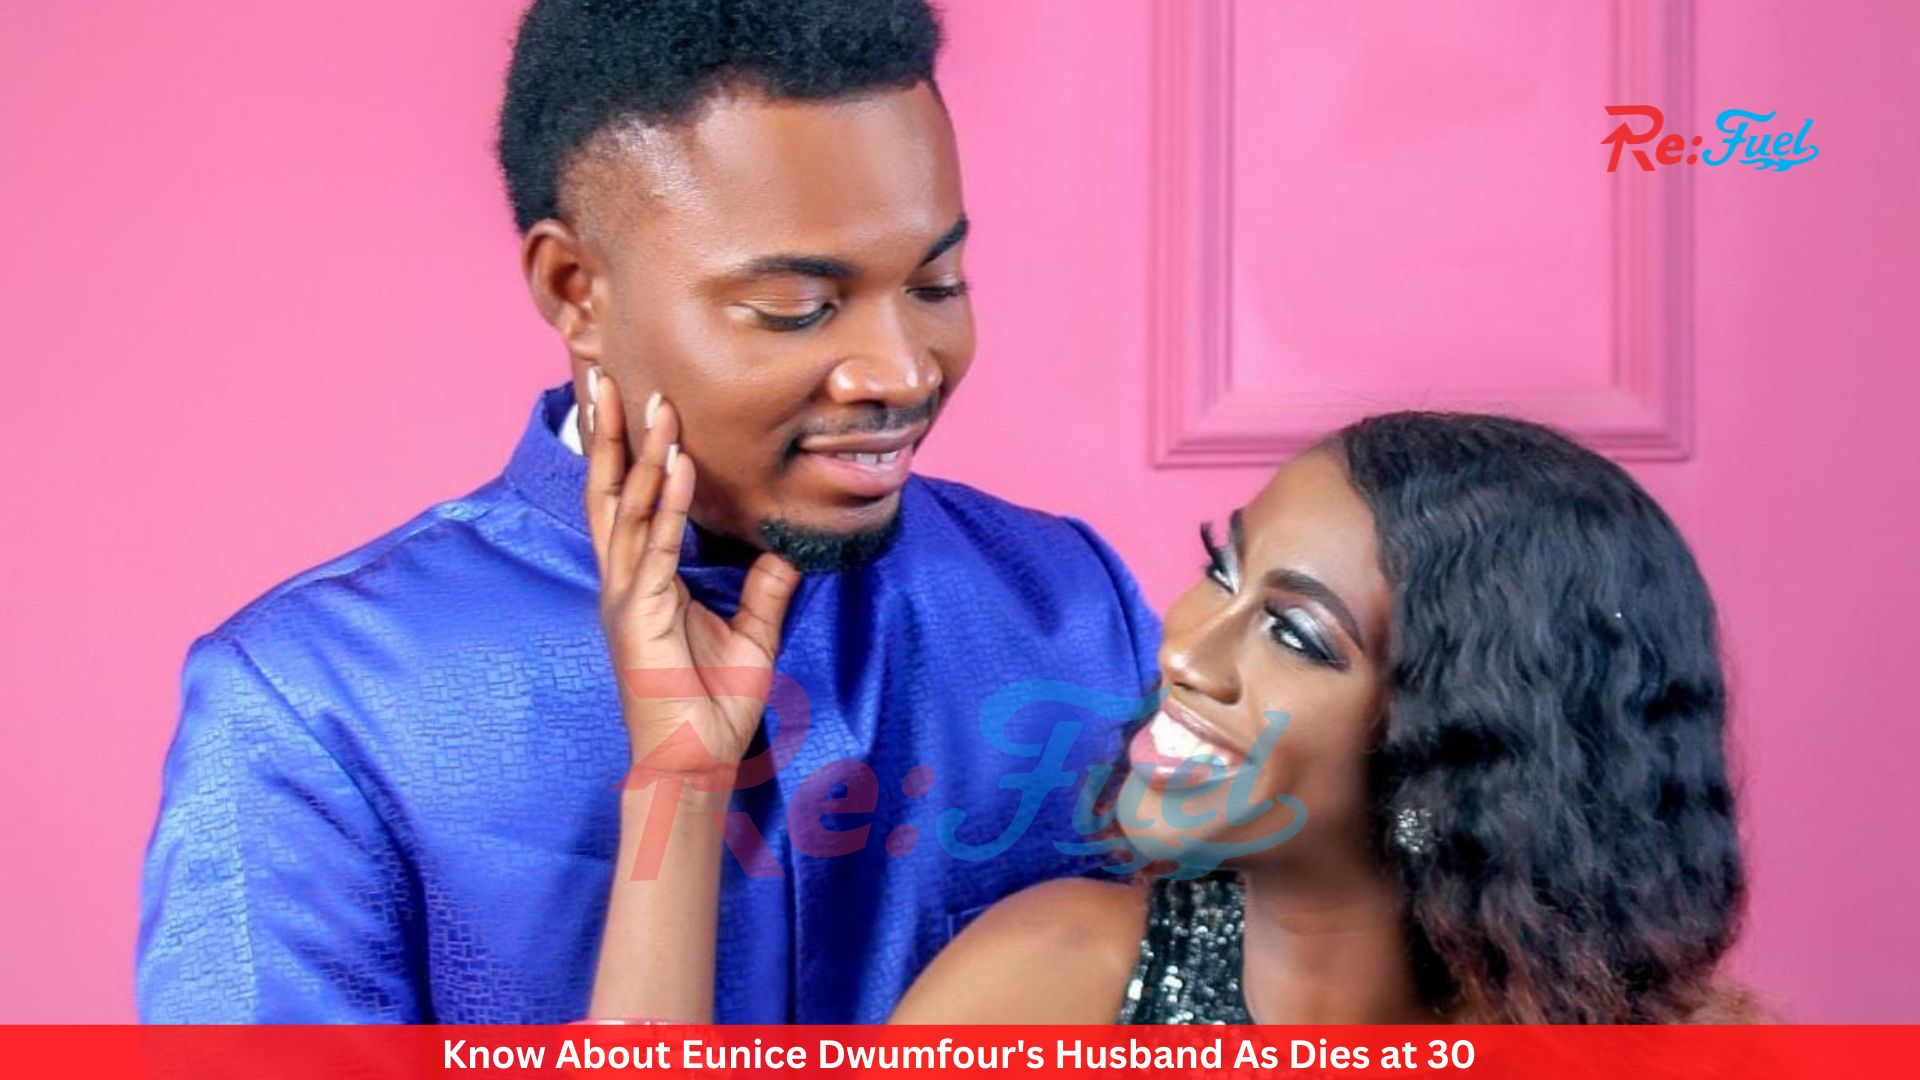 Know About Eunice Dwumfour's Husband As Dies at 30